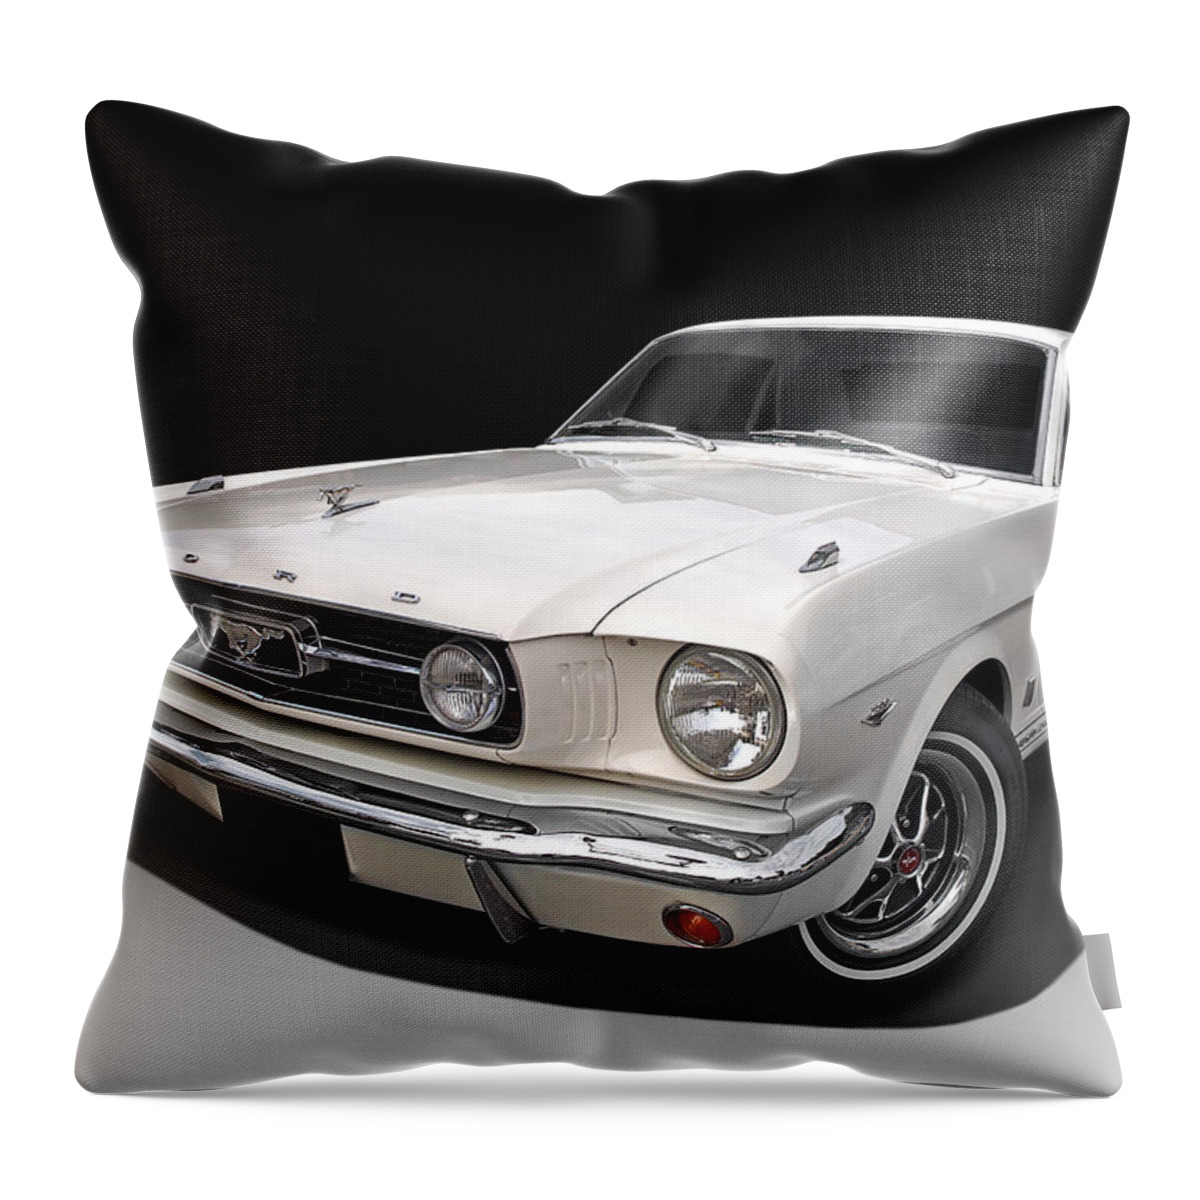 Ford Mustang Throw Pillow featuring the photograph White 1966 Mustang by Gill Billington